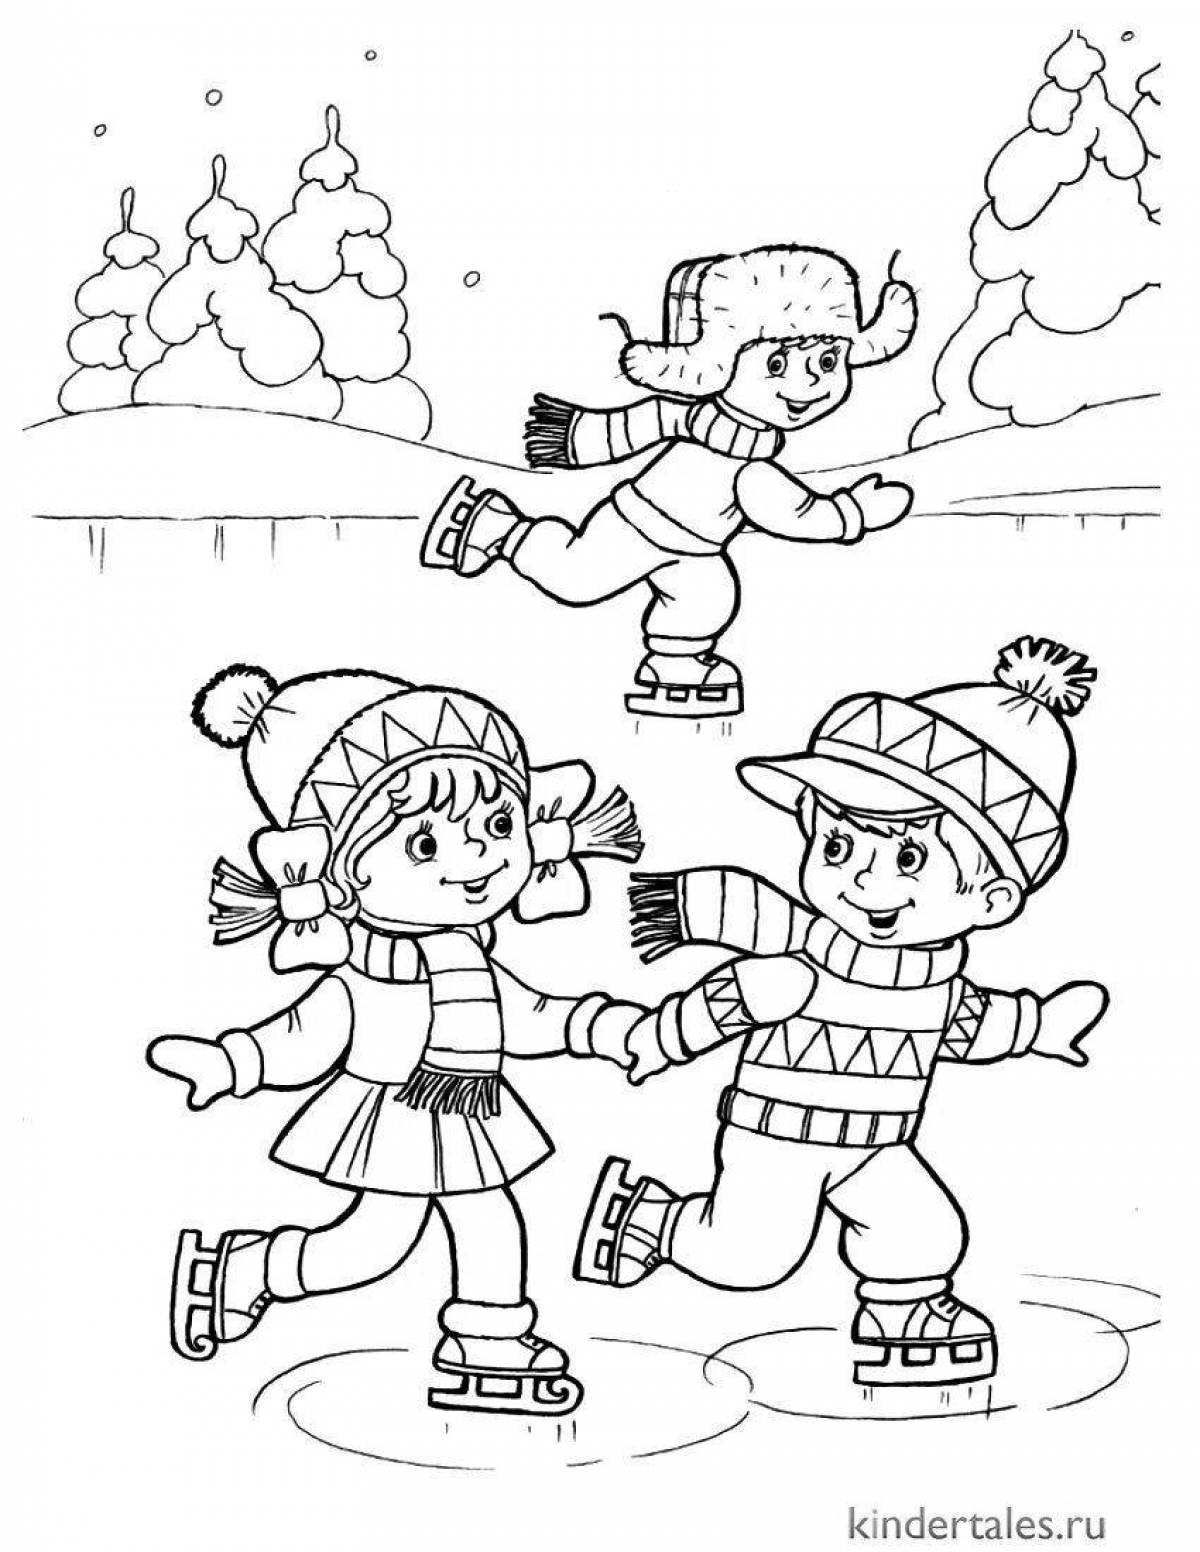 Large ice rink coloring page